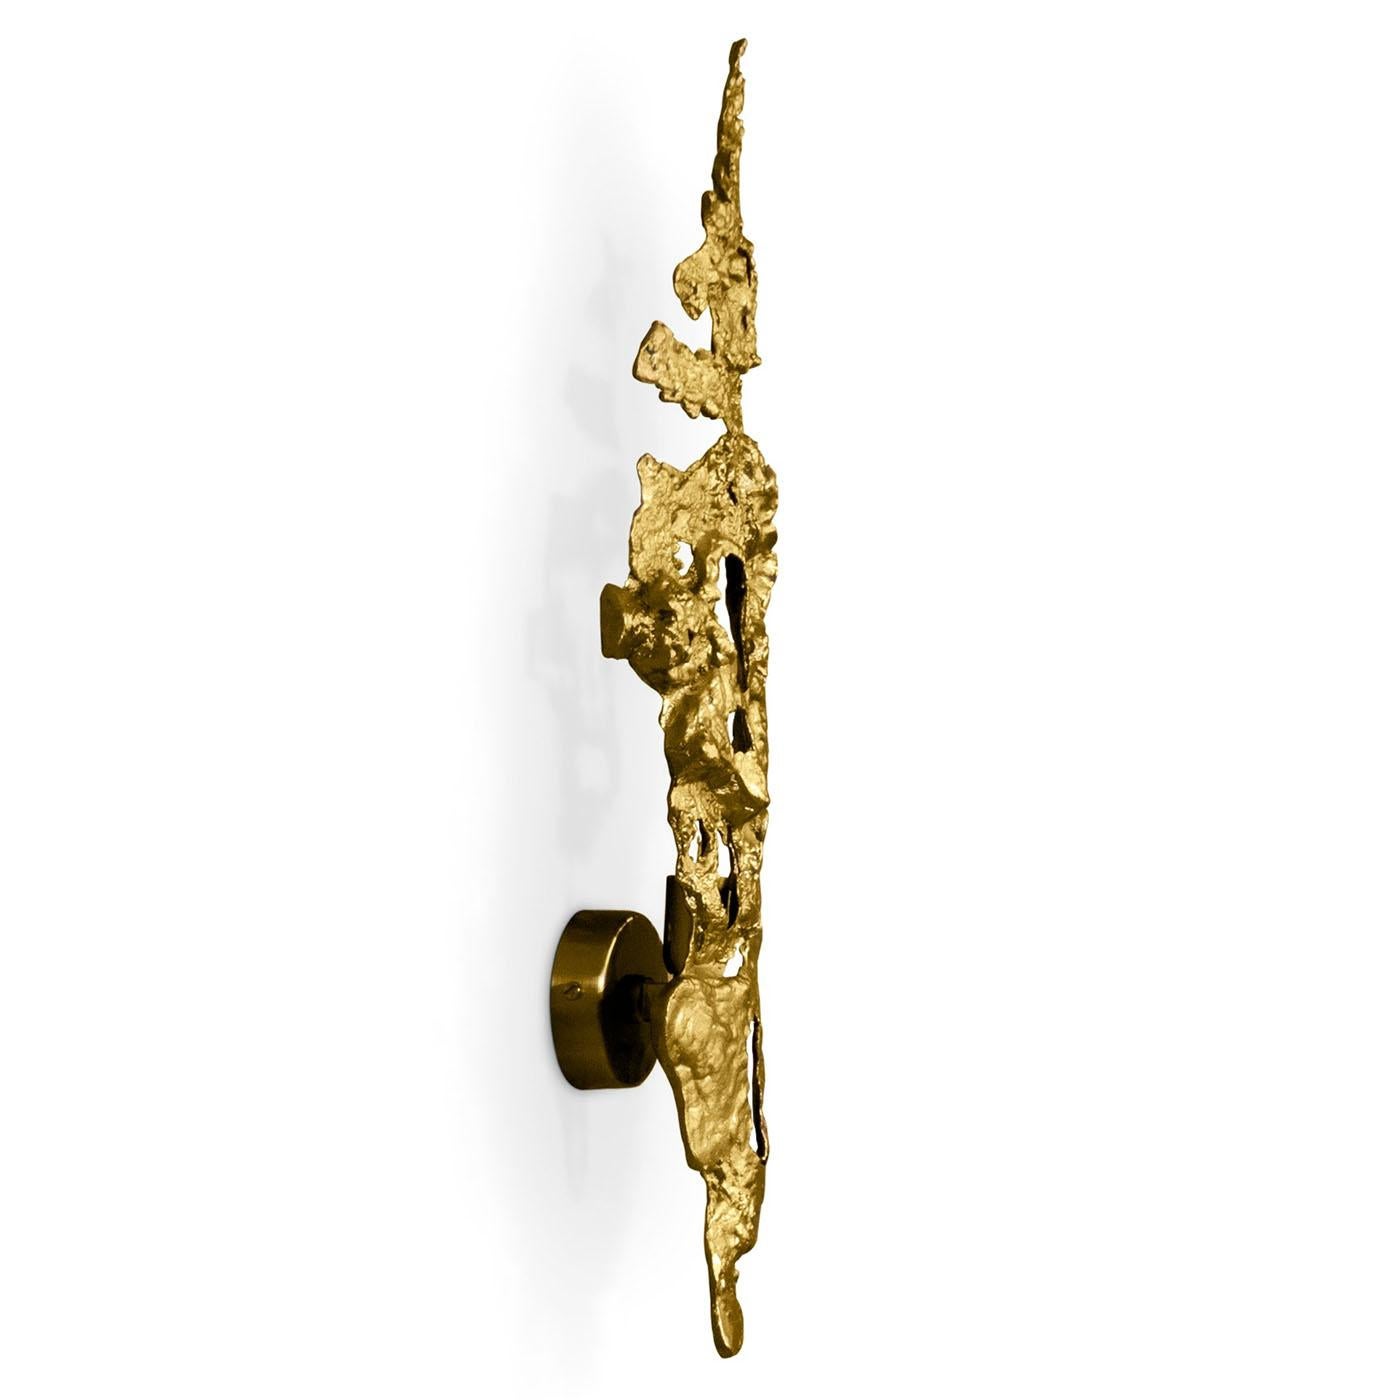 Wall Lamp Lava with structure in solid
casted brass. With 1 bulb, lamp holder 
type E14, max 40 watt. Bulb not included.